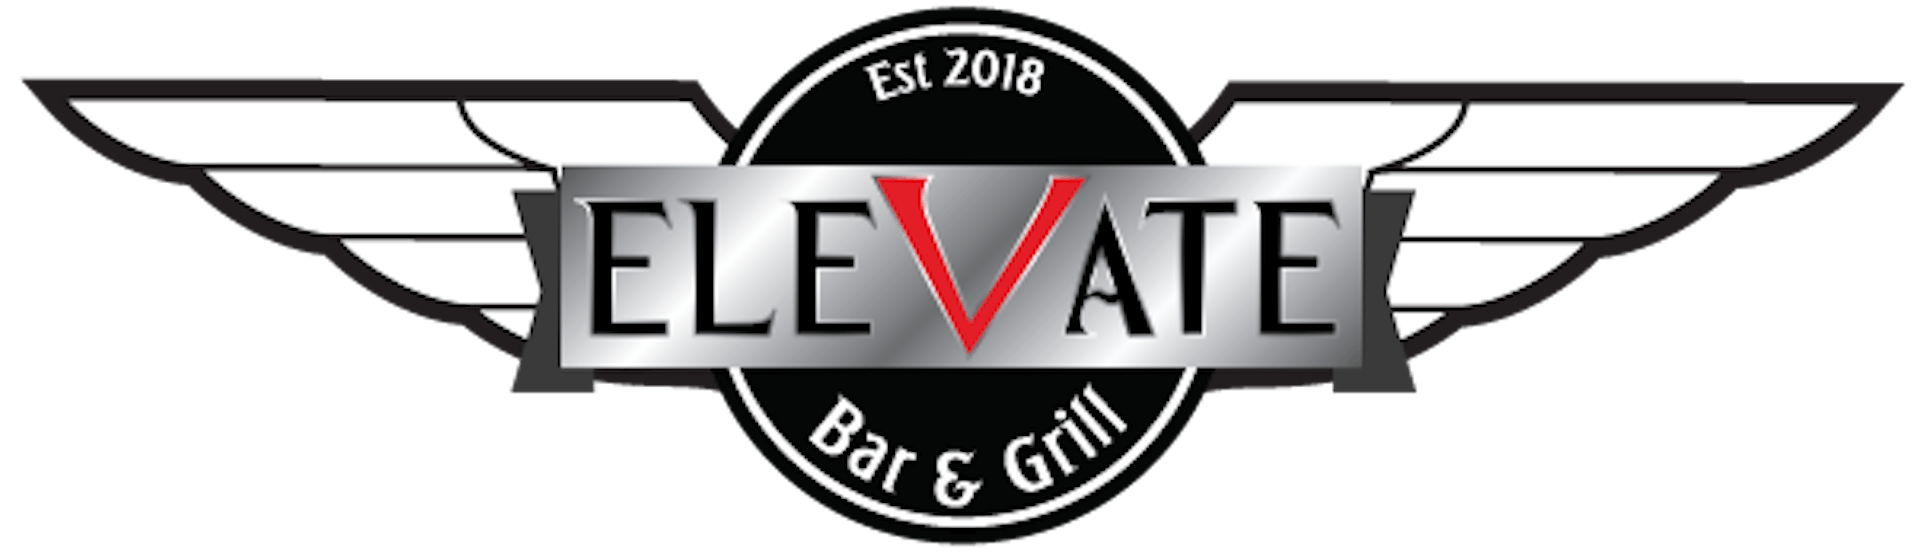 Elevate Bar & Grill